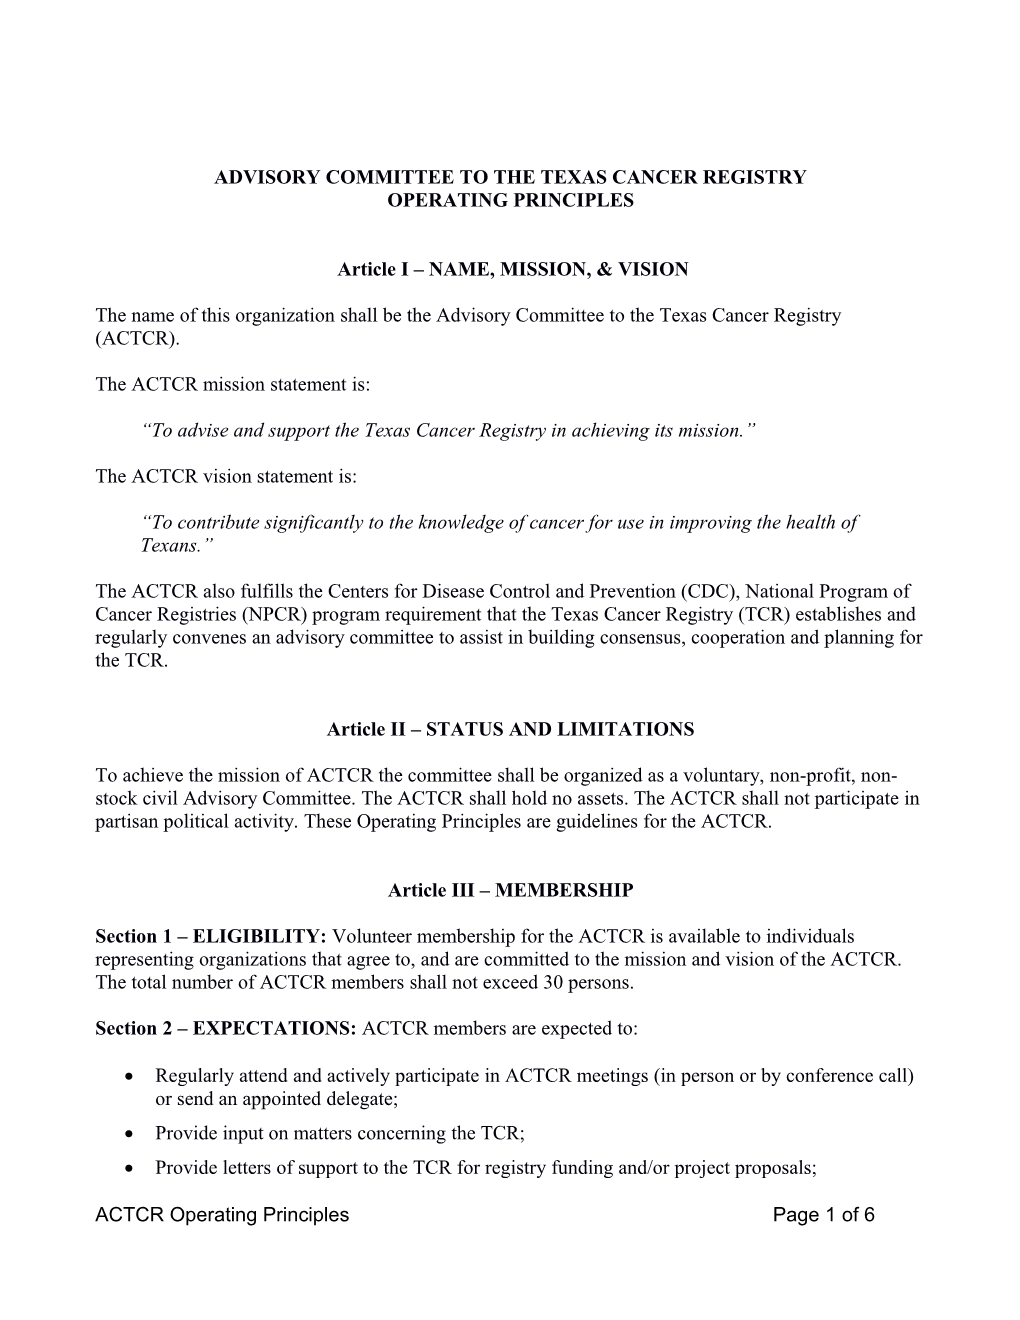 Advisory Committee to the Texas Cancer Registry